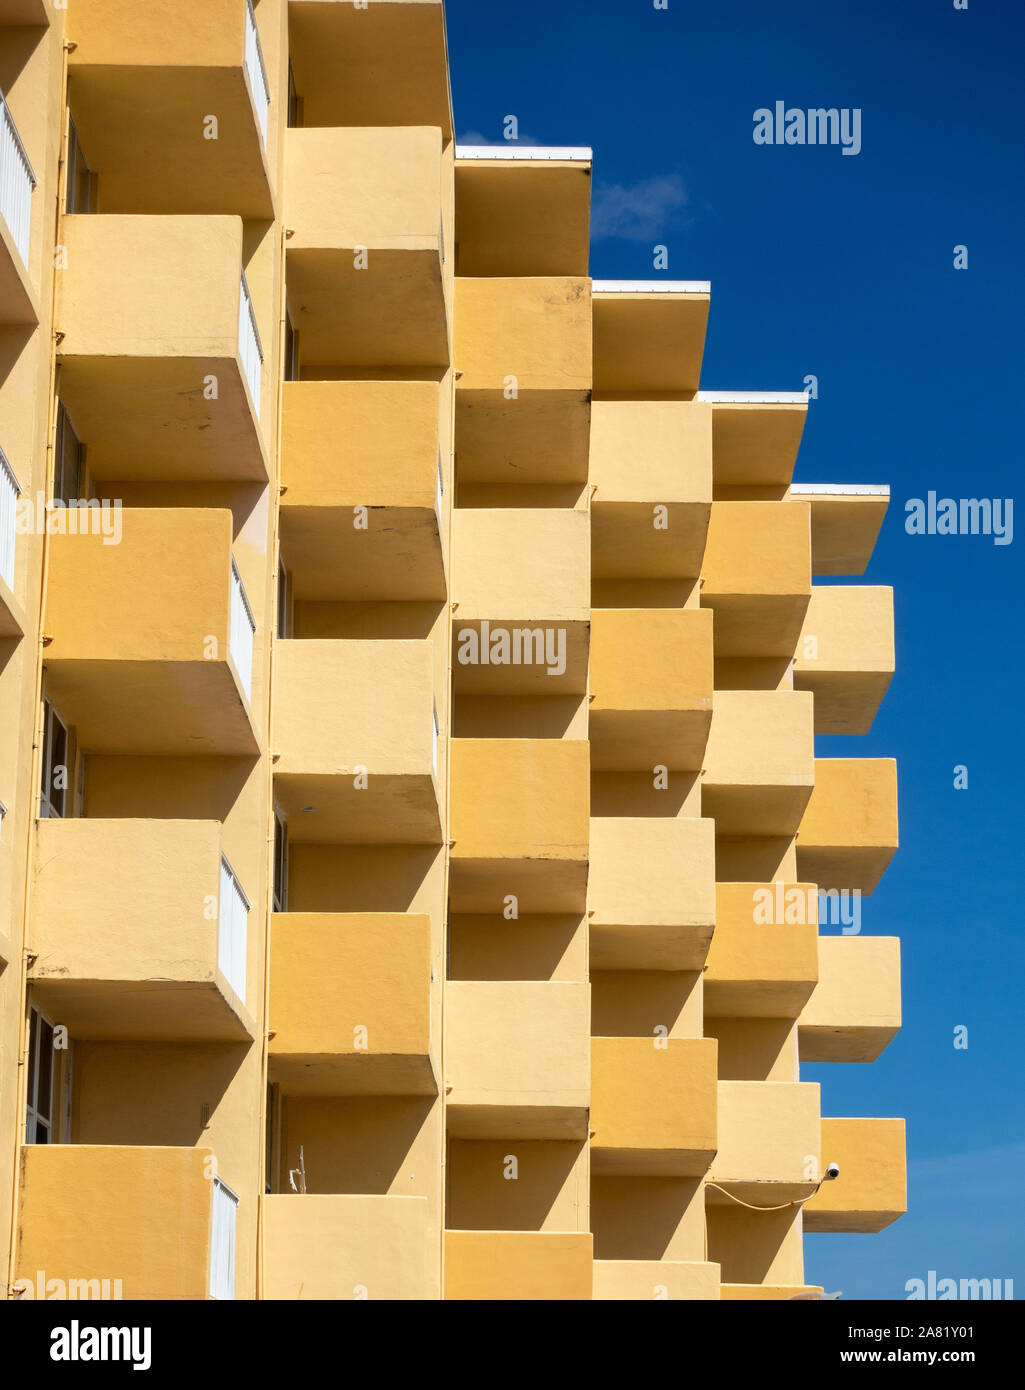 Sixties Architecture With Geometric Abstract Pattern Shapes From The Balconies Of A Hotel On Atlantic Avenue Daytona Beach Florida USA Stock Photo